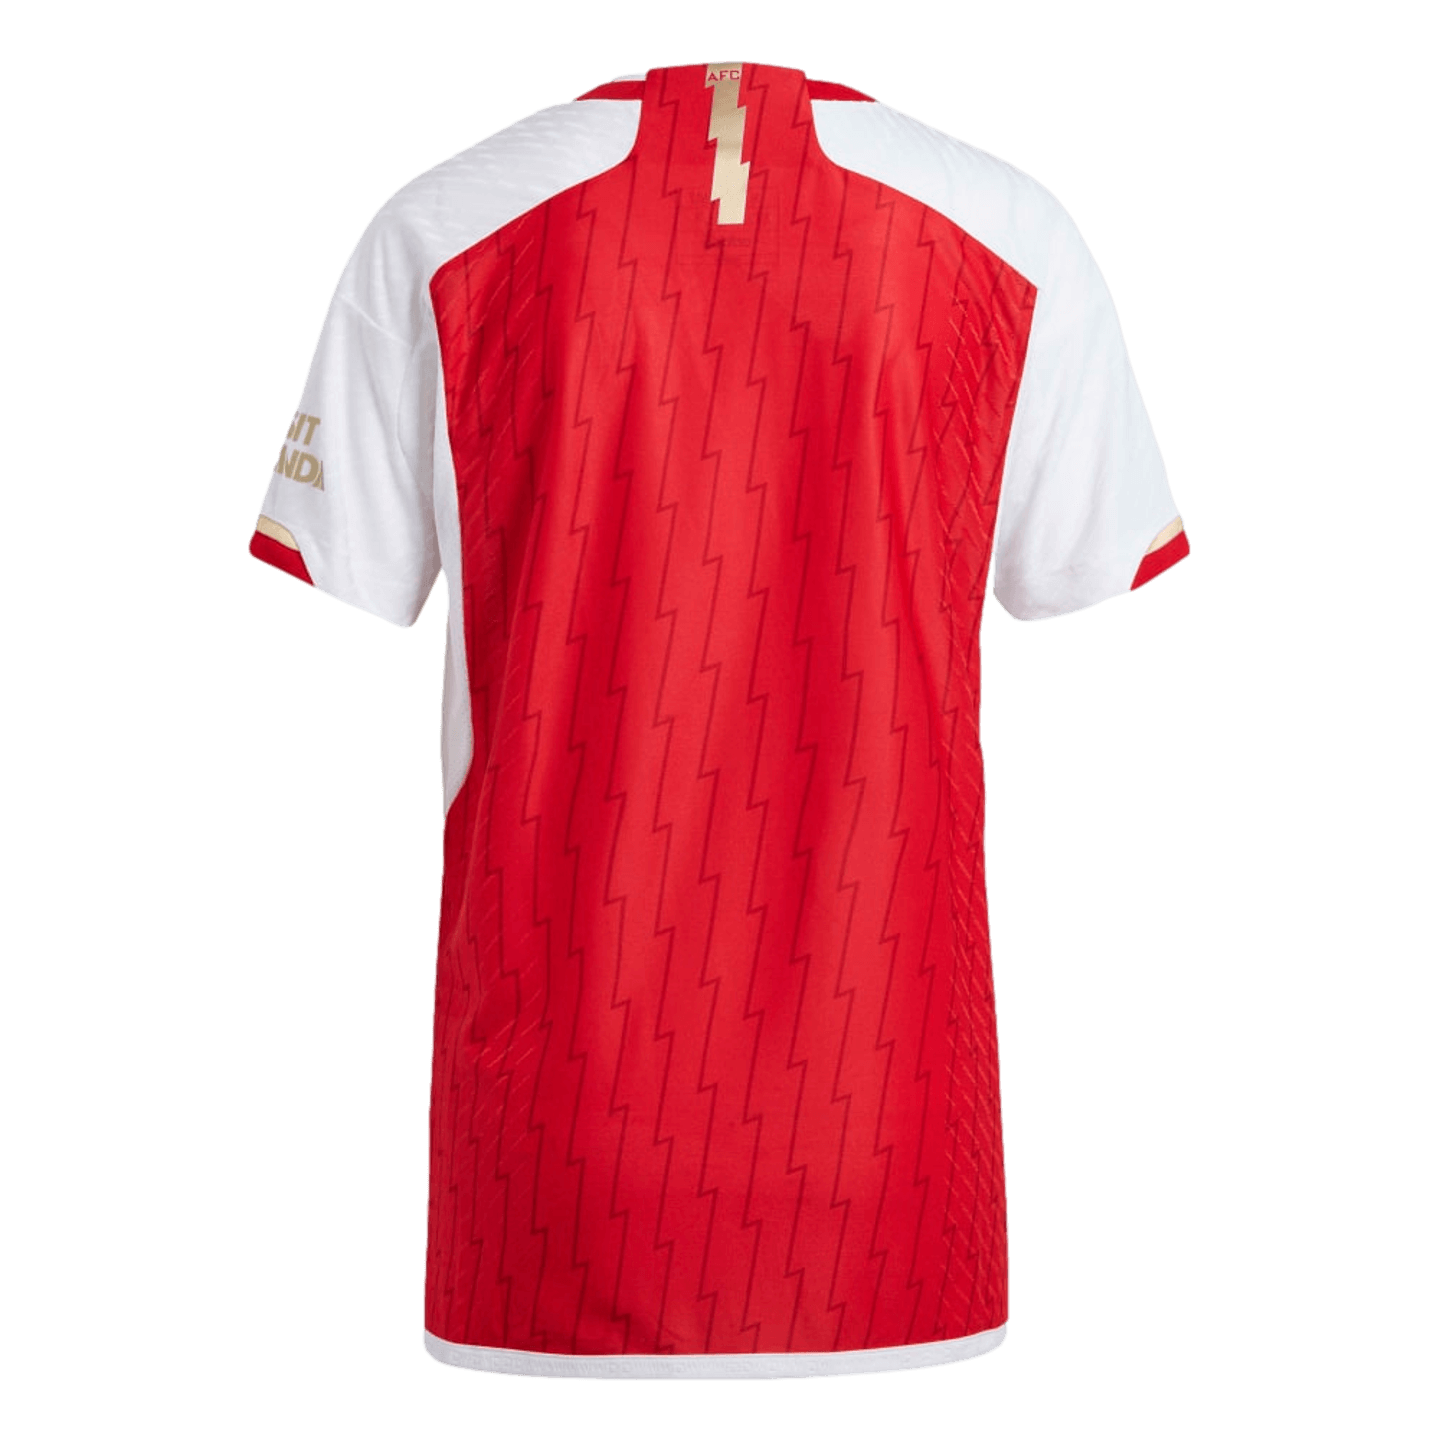 Adidas Arsenal 23/24 Authentic Home Jersey